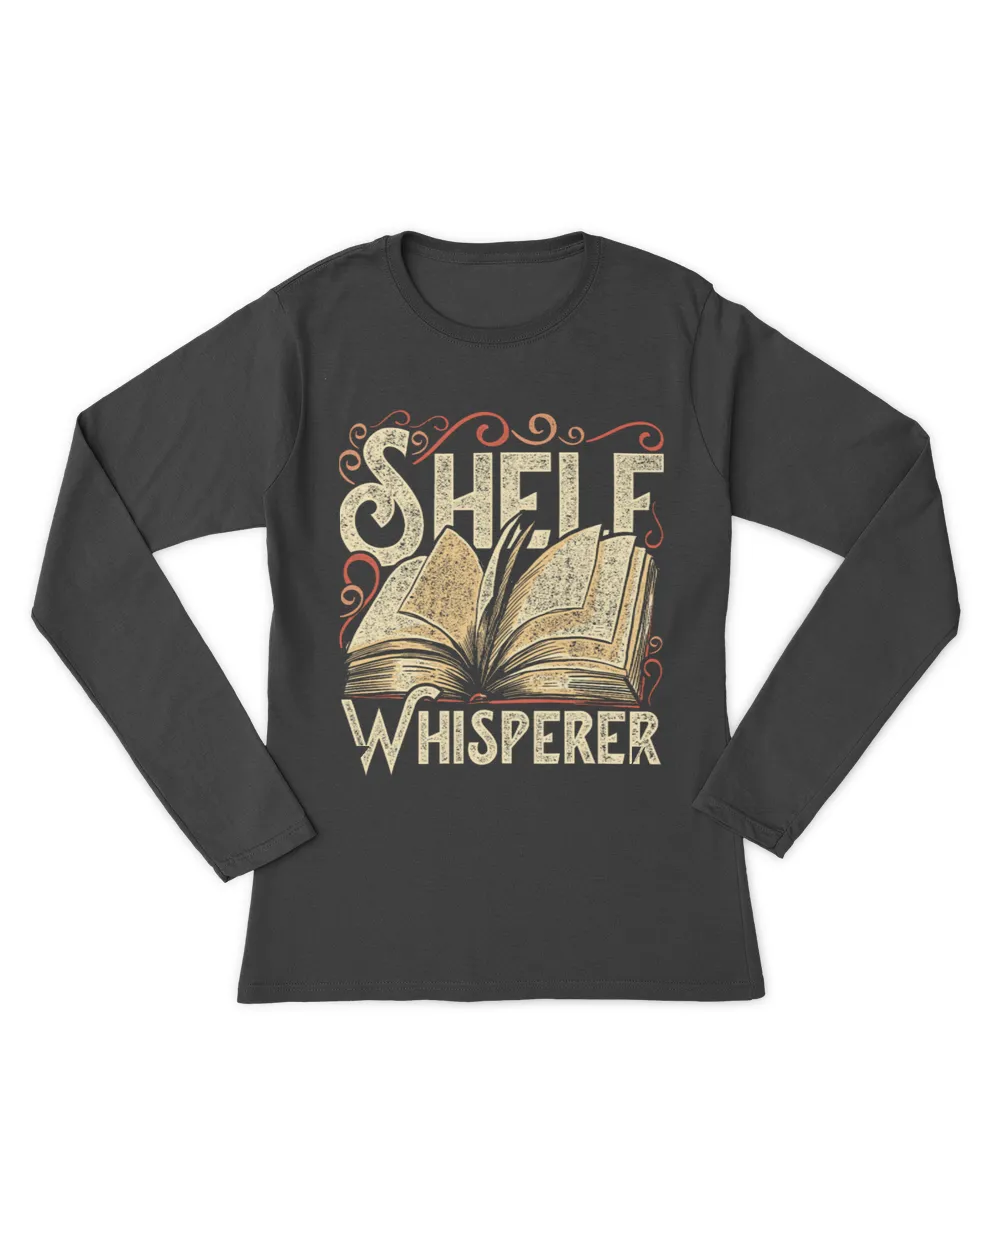 Library Assistant Librarian Bibliophile Shelf Whisperer